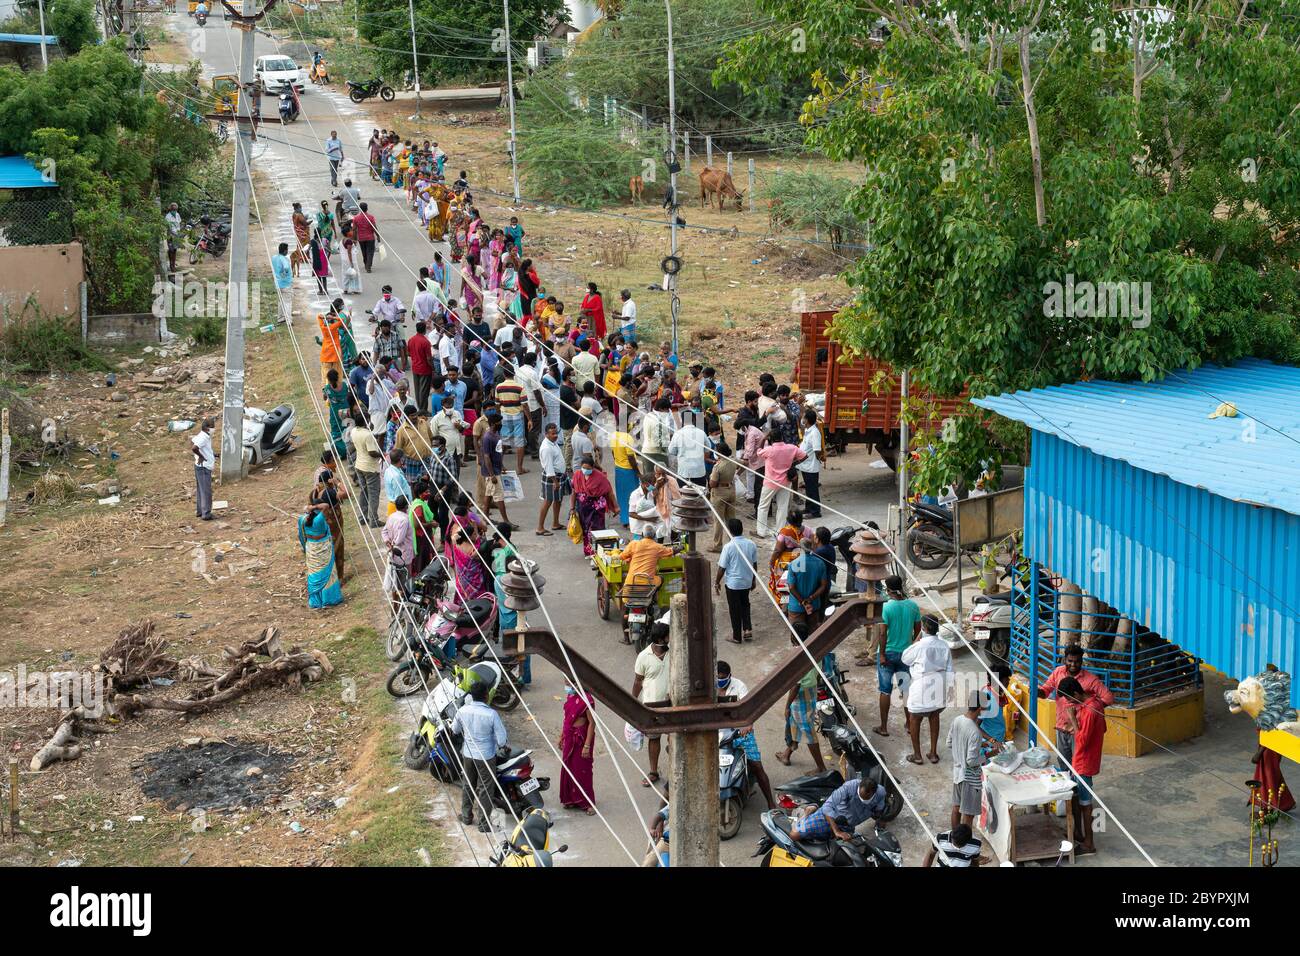 A group of people gather to receive free groceries and rice despite concerns about the spread of COVID-19. The crowd is watched by police, yet some pe Stock Photo